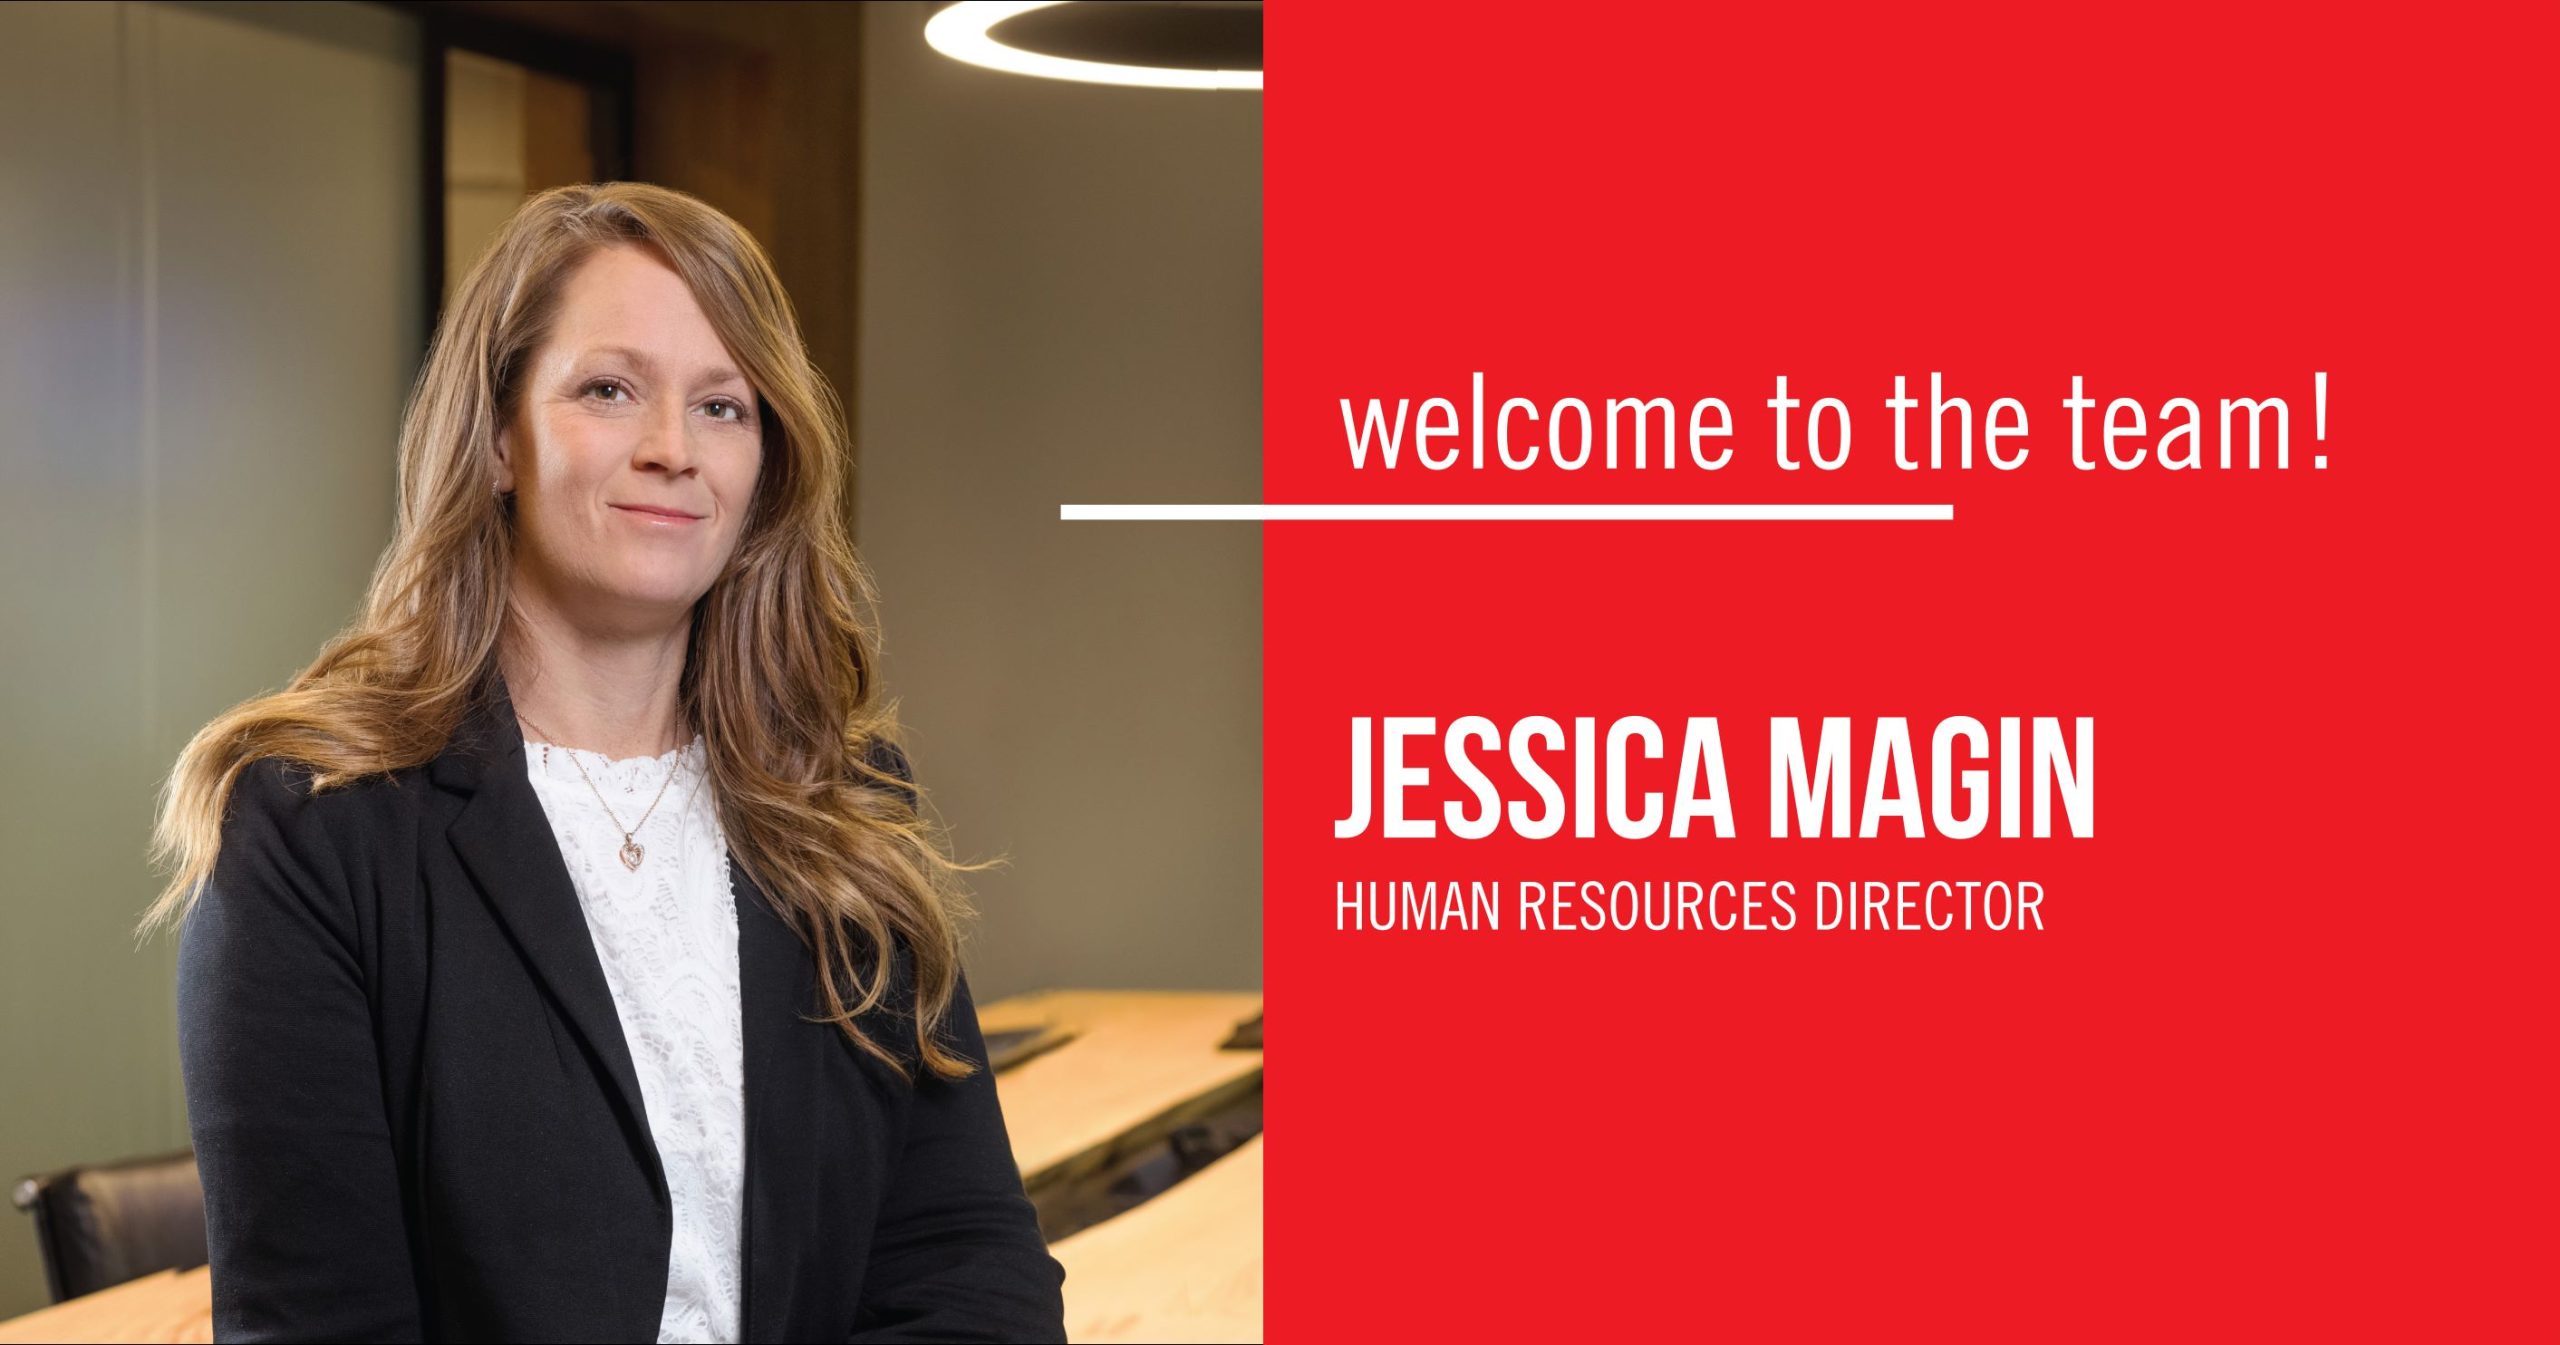 CCG Welcomes Jessie Magin, Human Resources Director, to the Team!